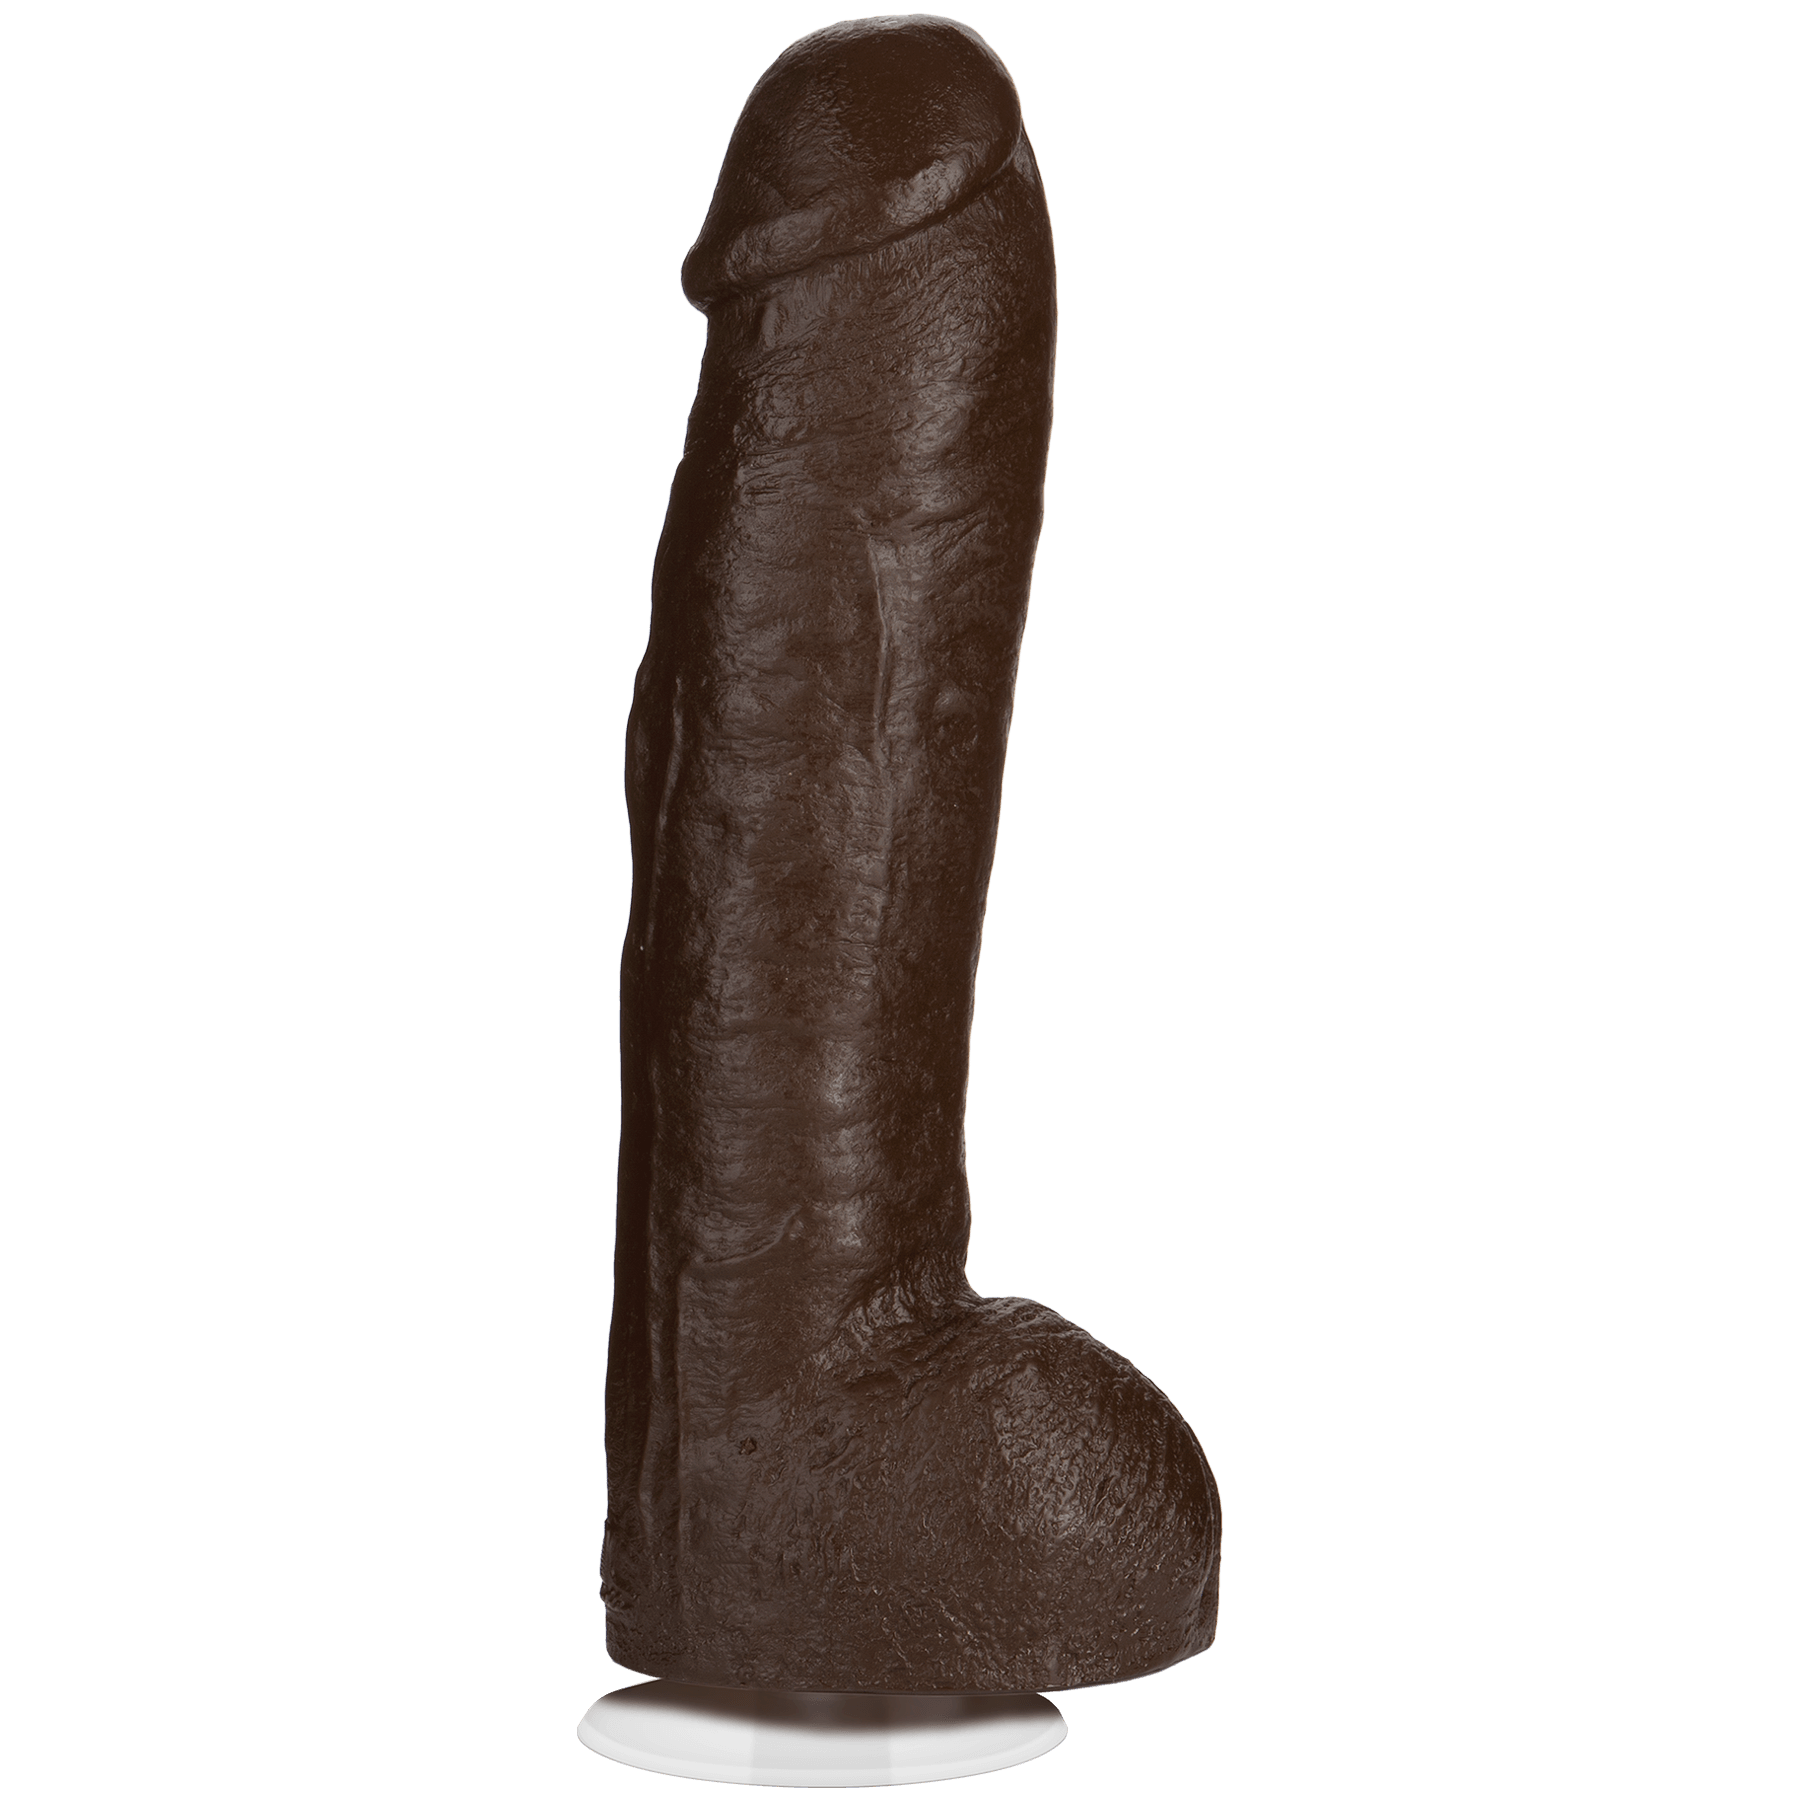 Doc Johnson Signature Cocks Bam Huge 13 Inch Realistic Cock - Buy At Luxury Toy X - Free 3-Day Shipping